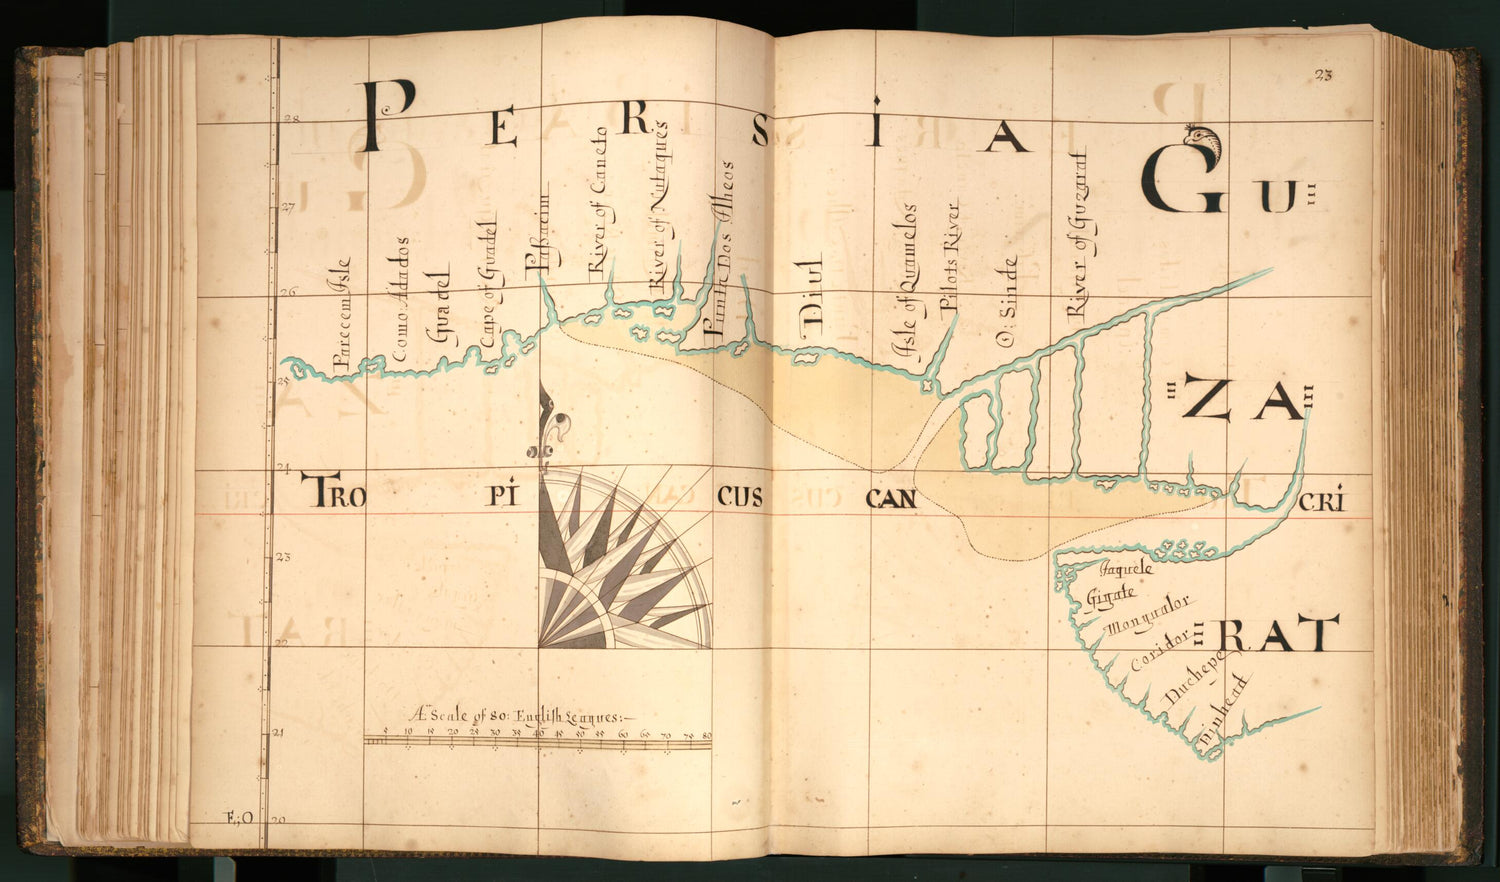 This old map of 23) Persia, Guzarat from Buccaneer Atlas from 1690 was created by William Hacke in 1690